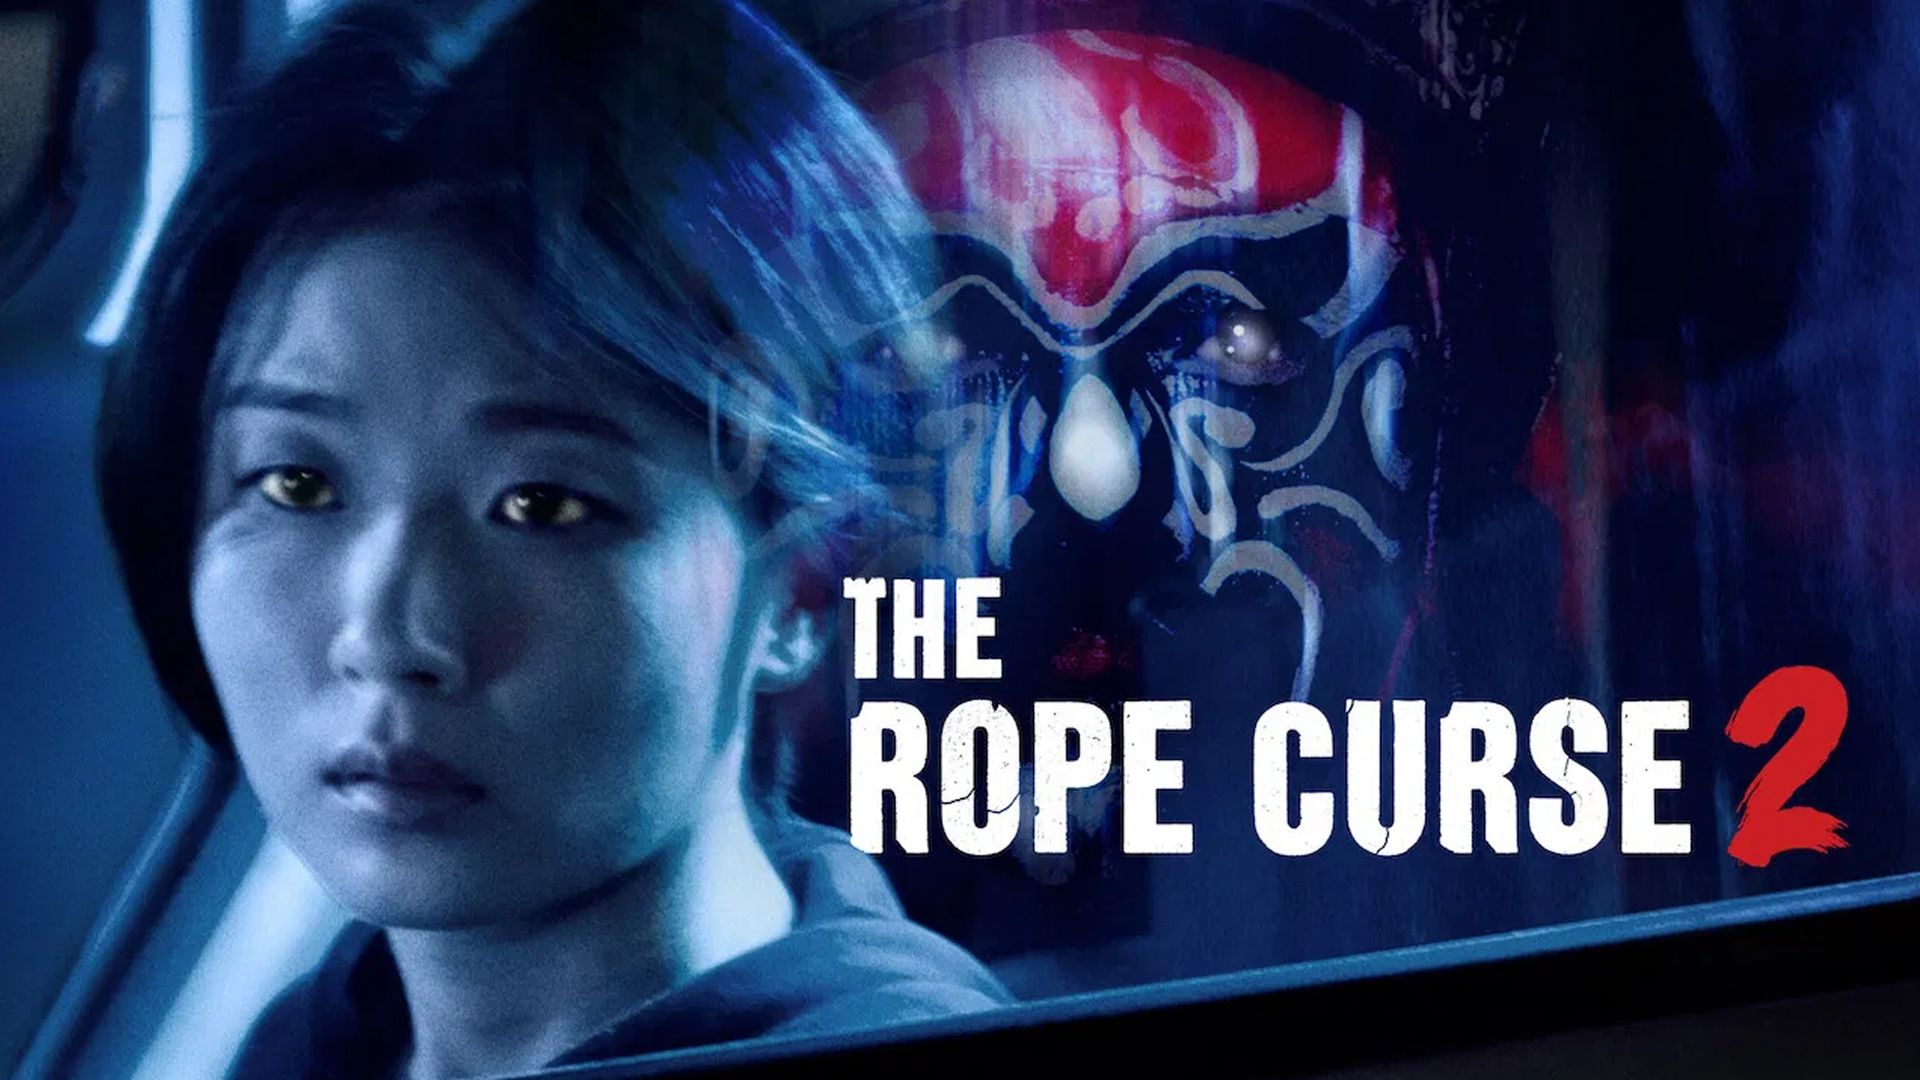 The Rope Curse 2 / The Rope Curse 2 (2020)